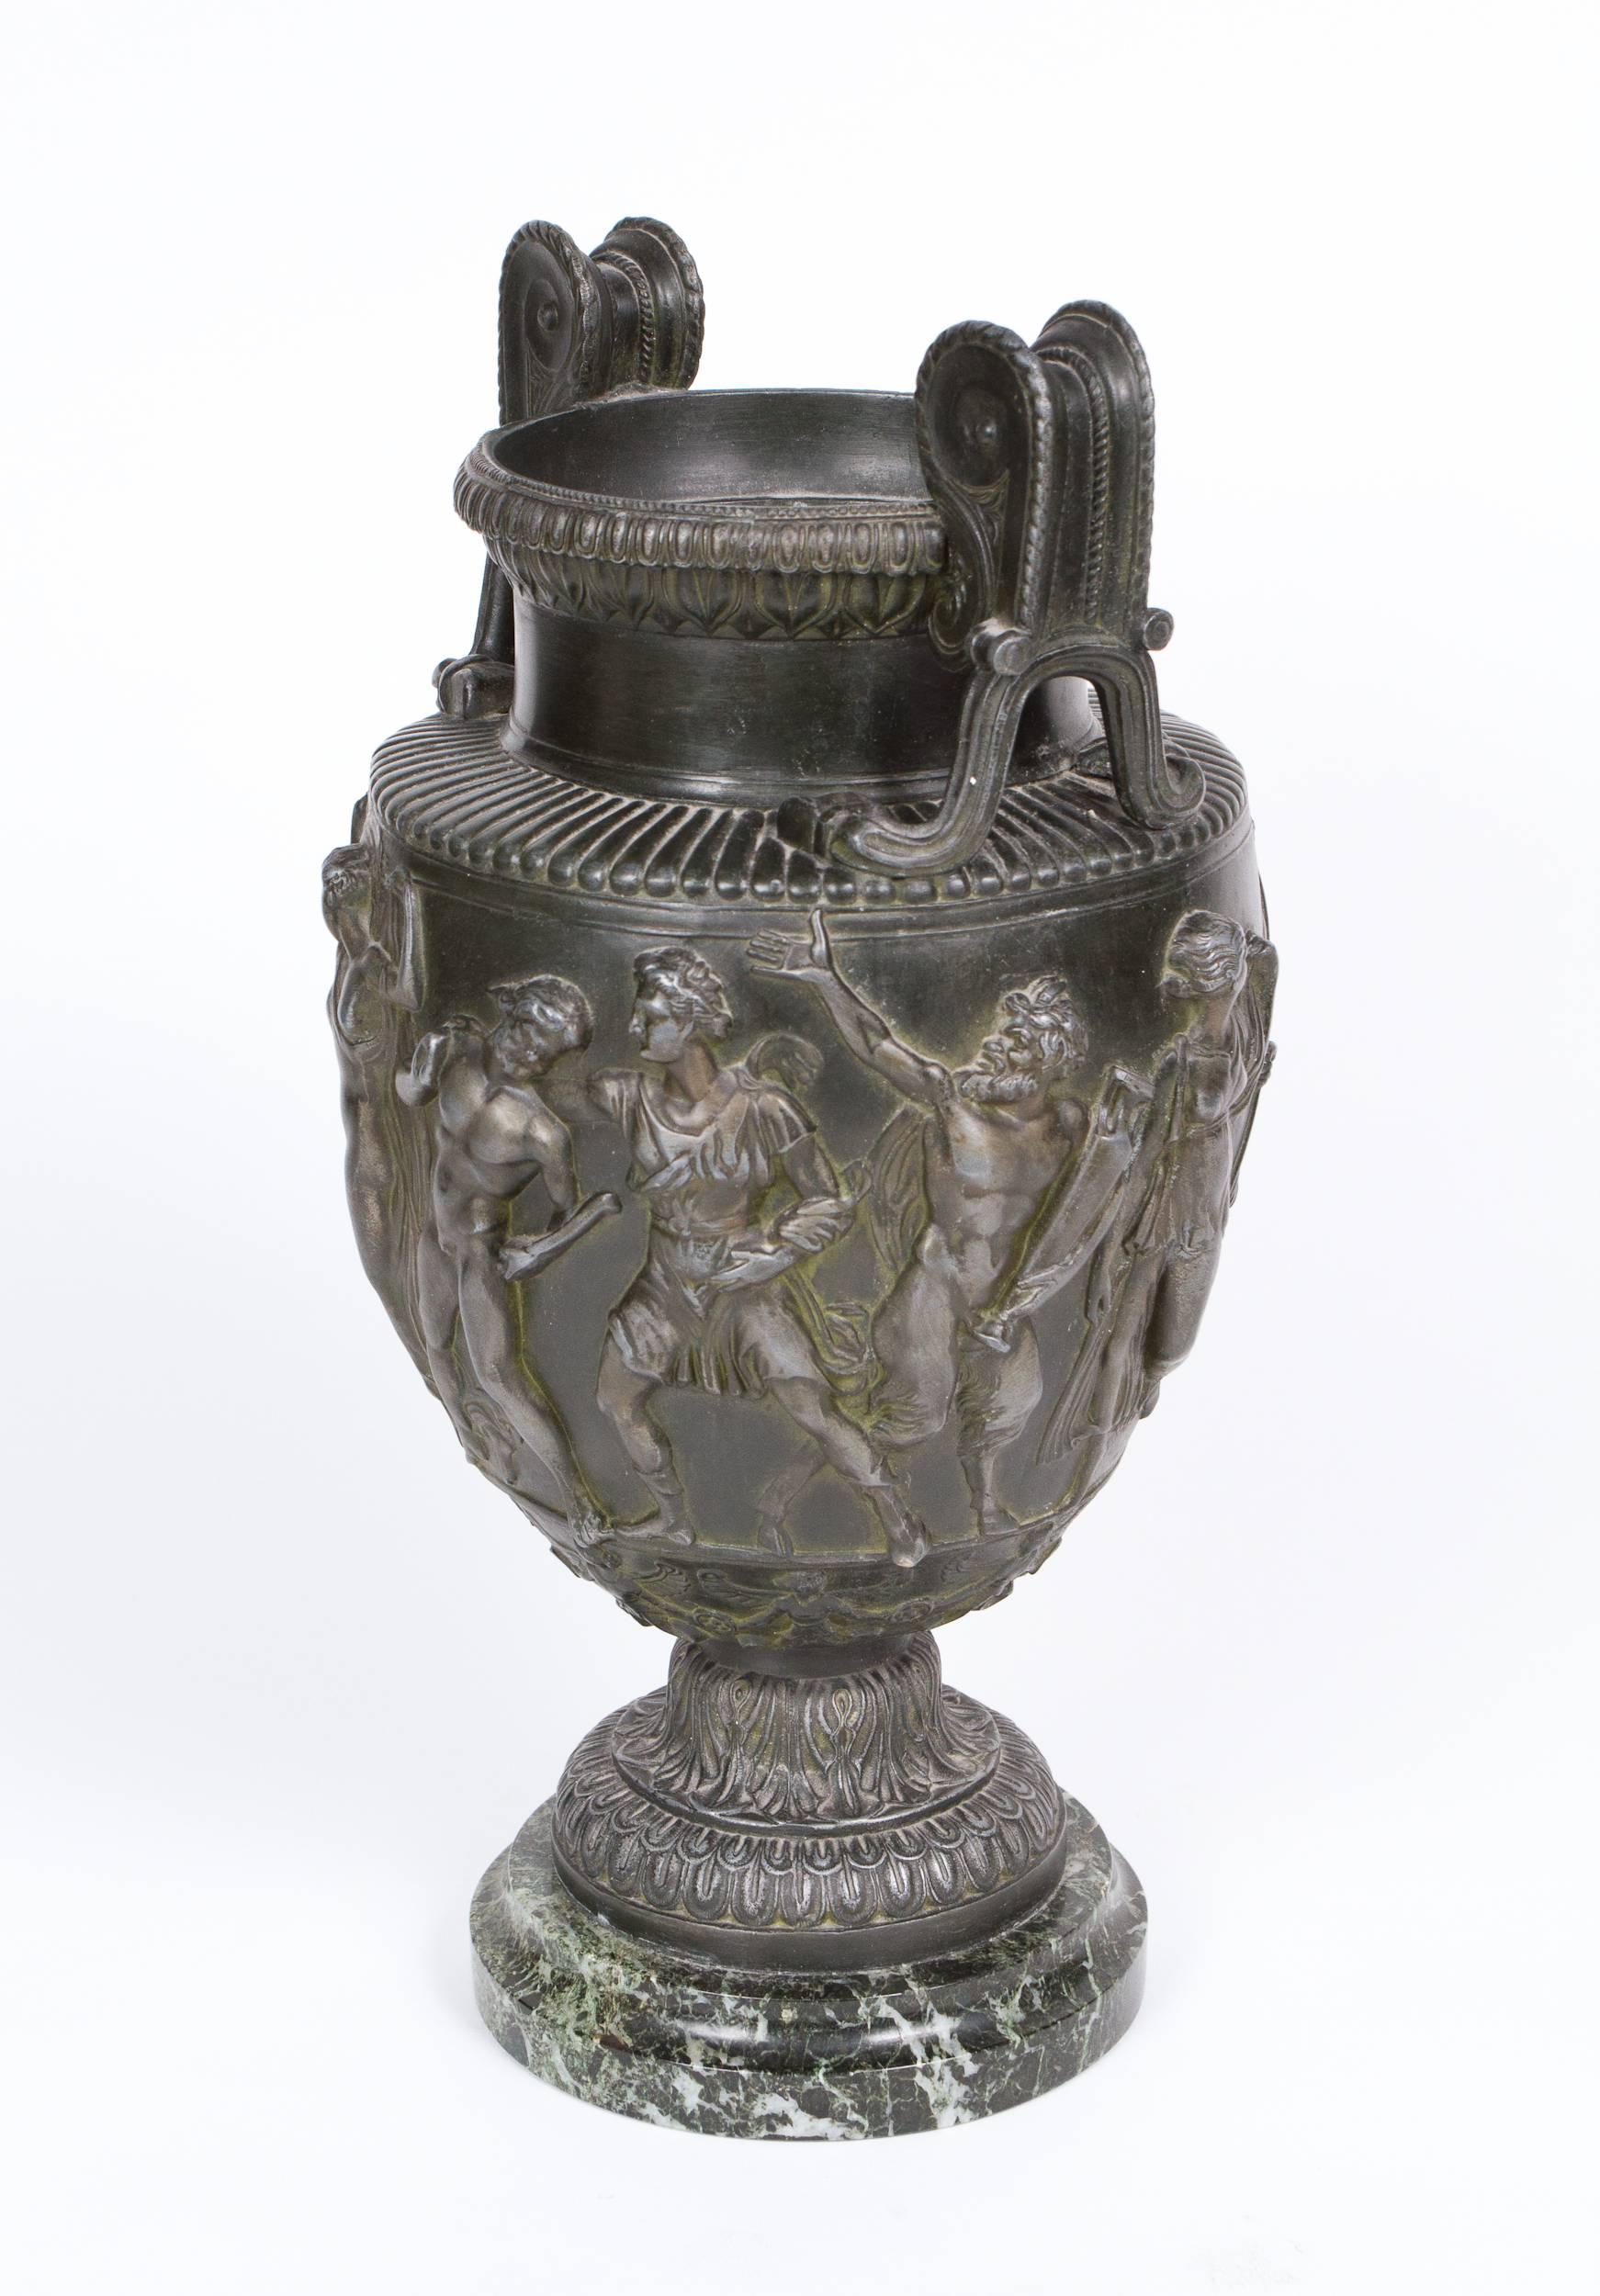 Neoclassical style patinated metal Grand Tour Campana vase featuring a frieze depicting a Bacchanalian procession. Set on an antico verde marble base.